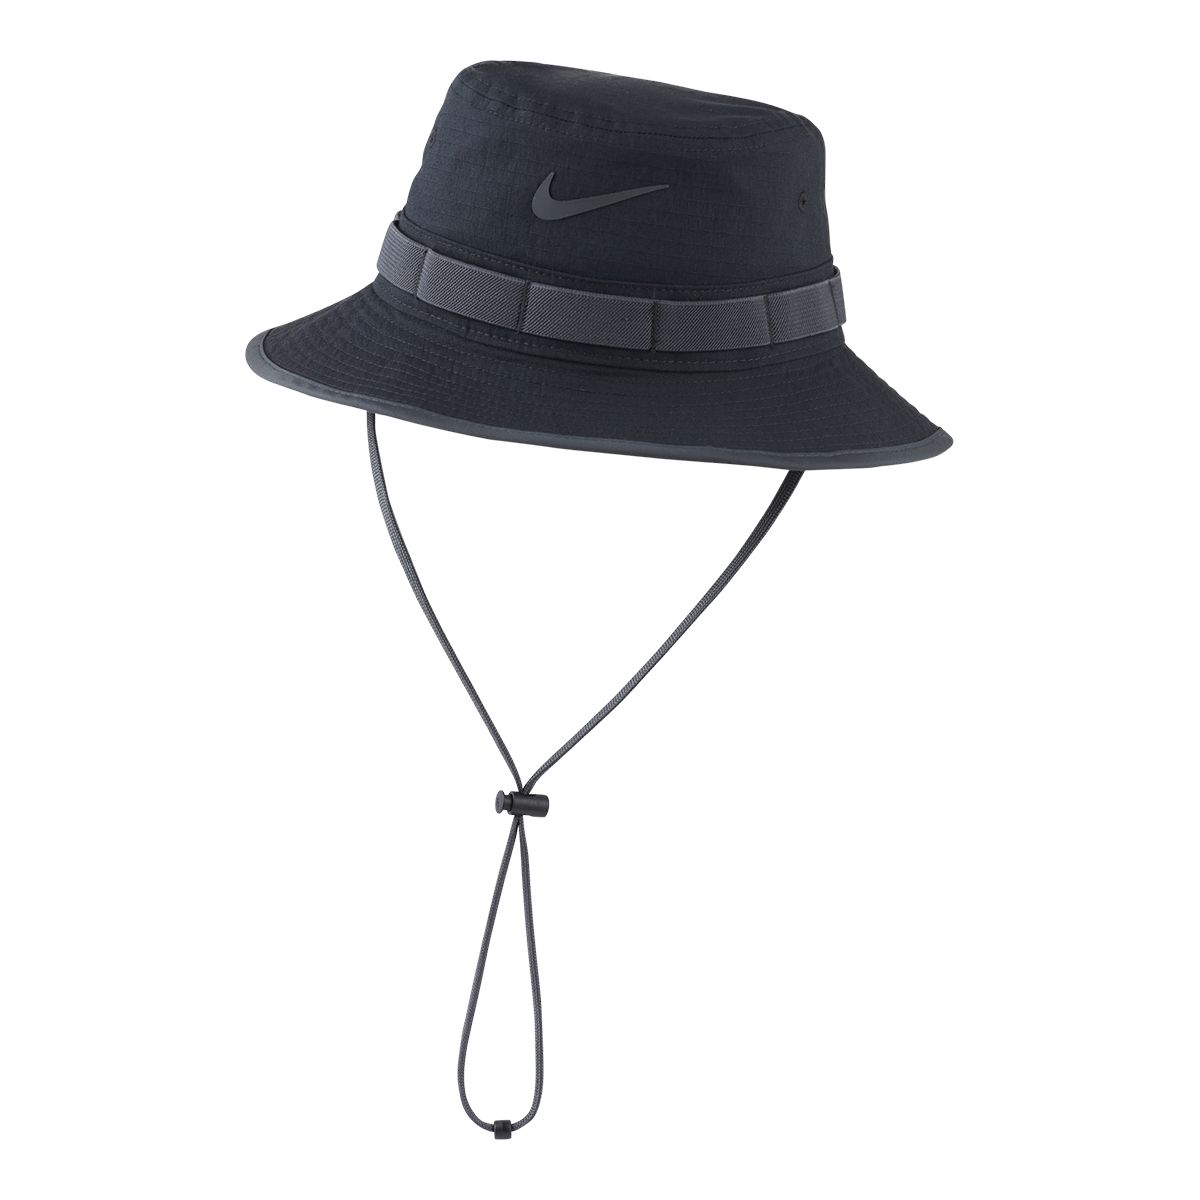 https://media-www.sportchek.ca/product/div-03-softgoods/dpt-79-clothing-accessories/sdpt-01-mens/333835432/nike-u-boonie-bucket-722-blk-gry-4404bc03-42df-4961-9e4a-652da31ee1b5-jpgrendition.jpg?imdensity=1&imwidth=1244&impolicy=mZoom